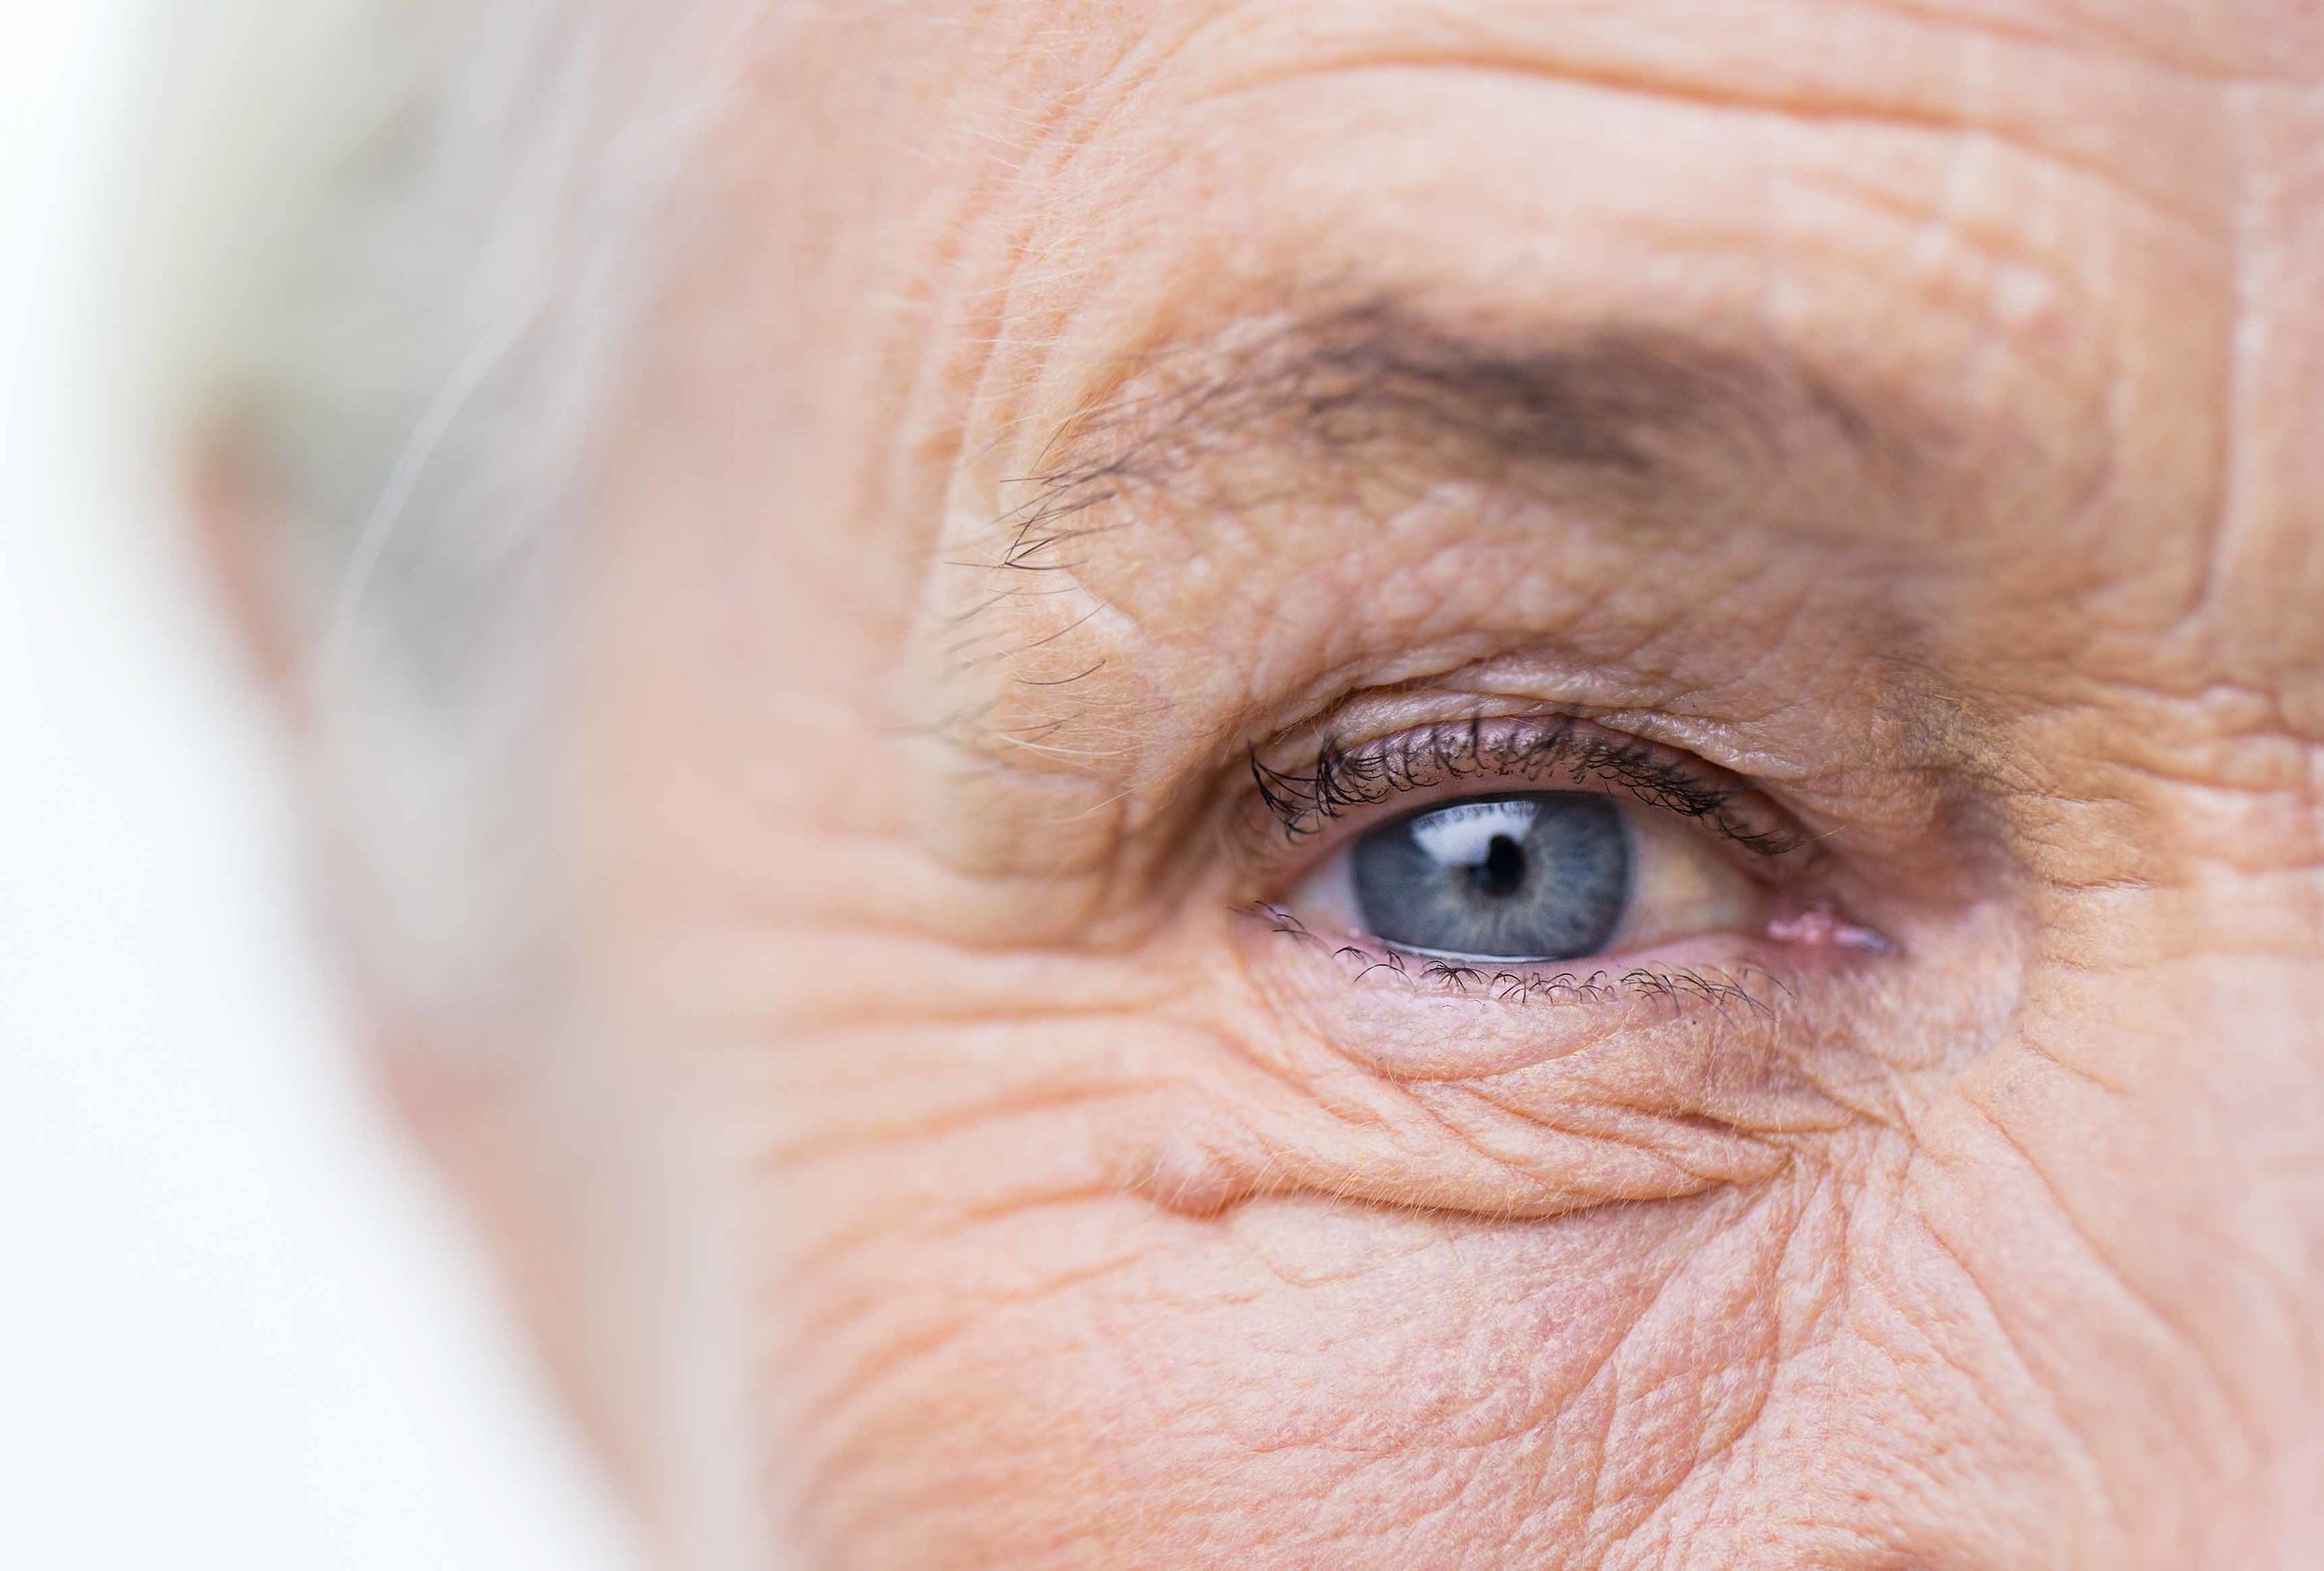   WHAT ARE MY OPTIONS?   Advanced Cataract Surgery    Learn More  